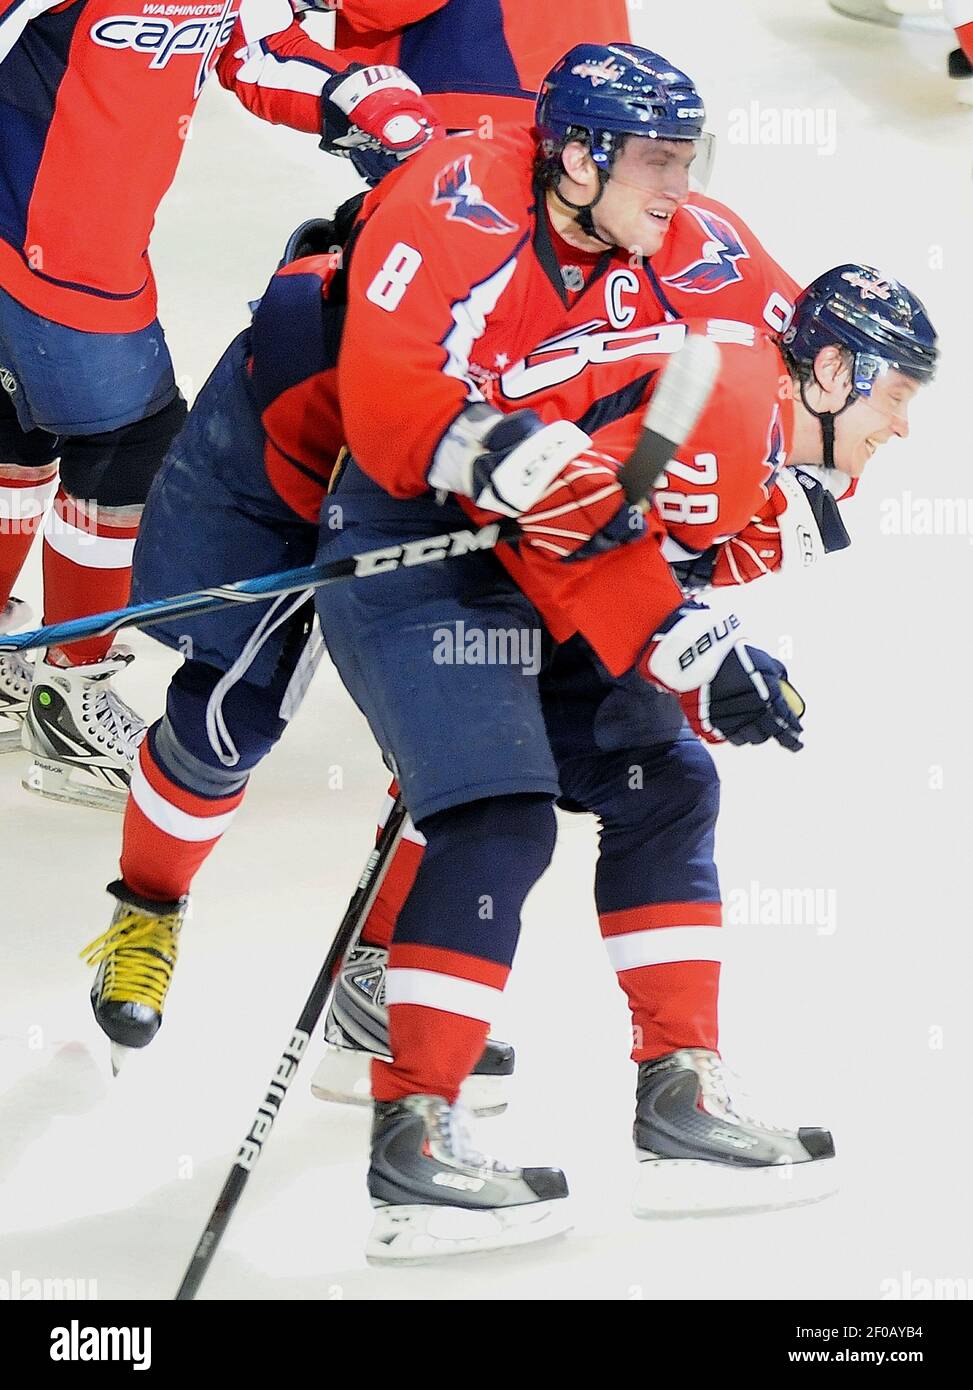 https://c8.alamy.com/comp/2F0AYB4/washington-capitals-left-wing-alex-ovechkin-8-jumps-on-the-back-of-left-wing-alexander-semin-28-after-semin-scored-the-game-winning-goal-during-the-overtime-period-of-game-1-of-the-nhl-eastern-conference-quarterfinals-playoffs-at-the-verizon-center-wednesday-april-13-2011-washington-defeated-new-york-2-1-in-overtime-photo-by-chuck-myersmctsipa-usa-2F0AYB4.jpg